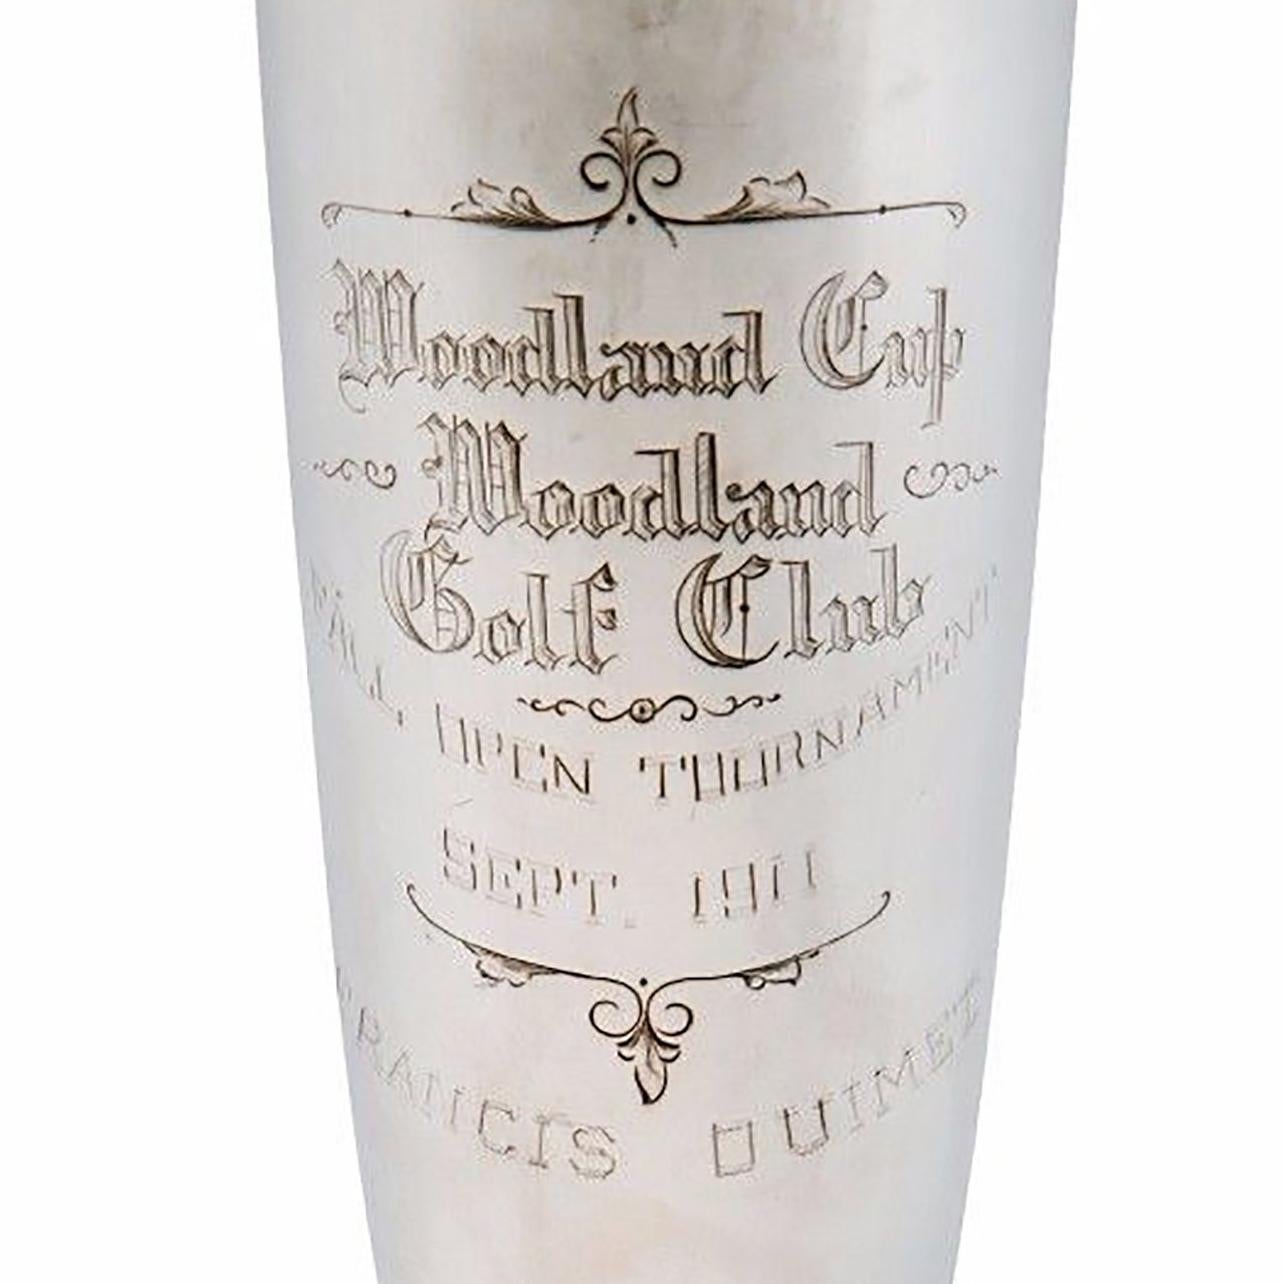 Possibly one of the most important pieces of golf history listed for your best offer. 

Francis Ouimet 'The Father of Amatuer Golf' 1911 Woodland Cup Fall Open Trophy awarded to Francis Ouimet! This is one of those extremely rare once in a lifetime